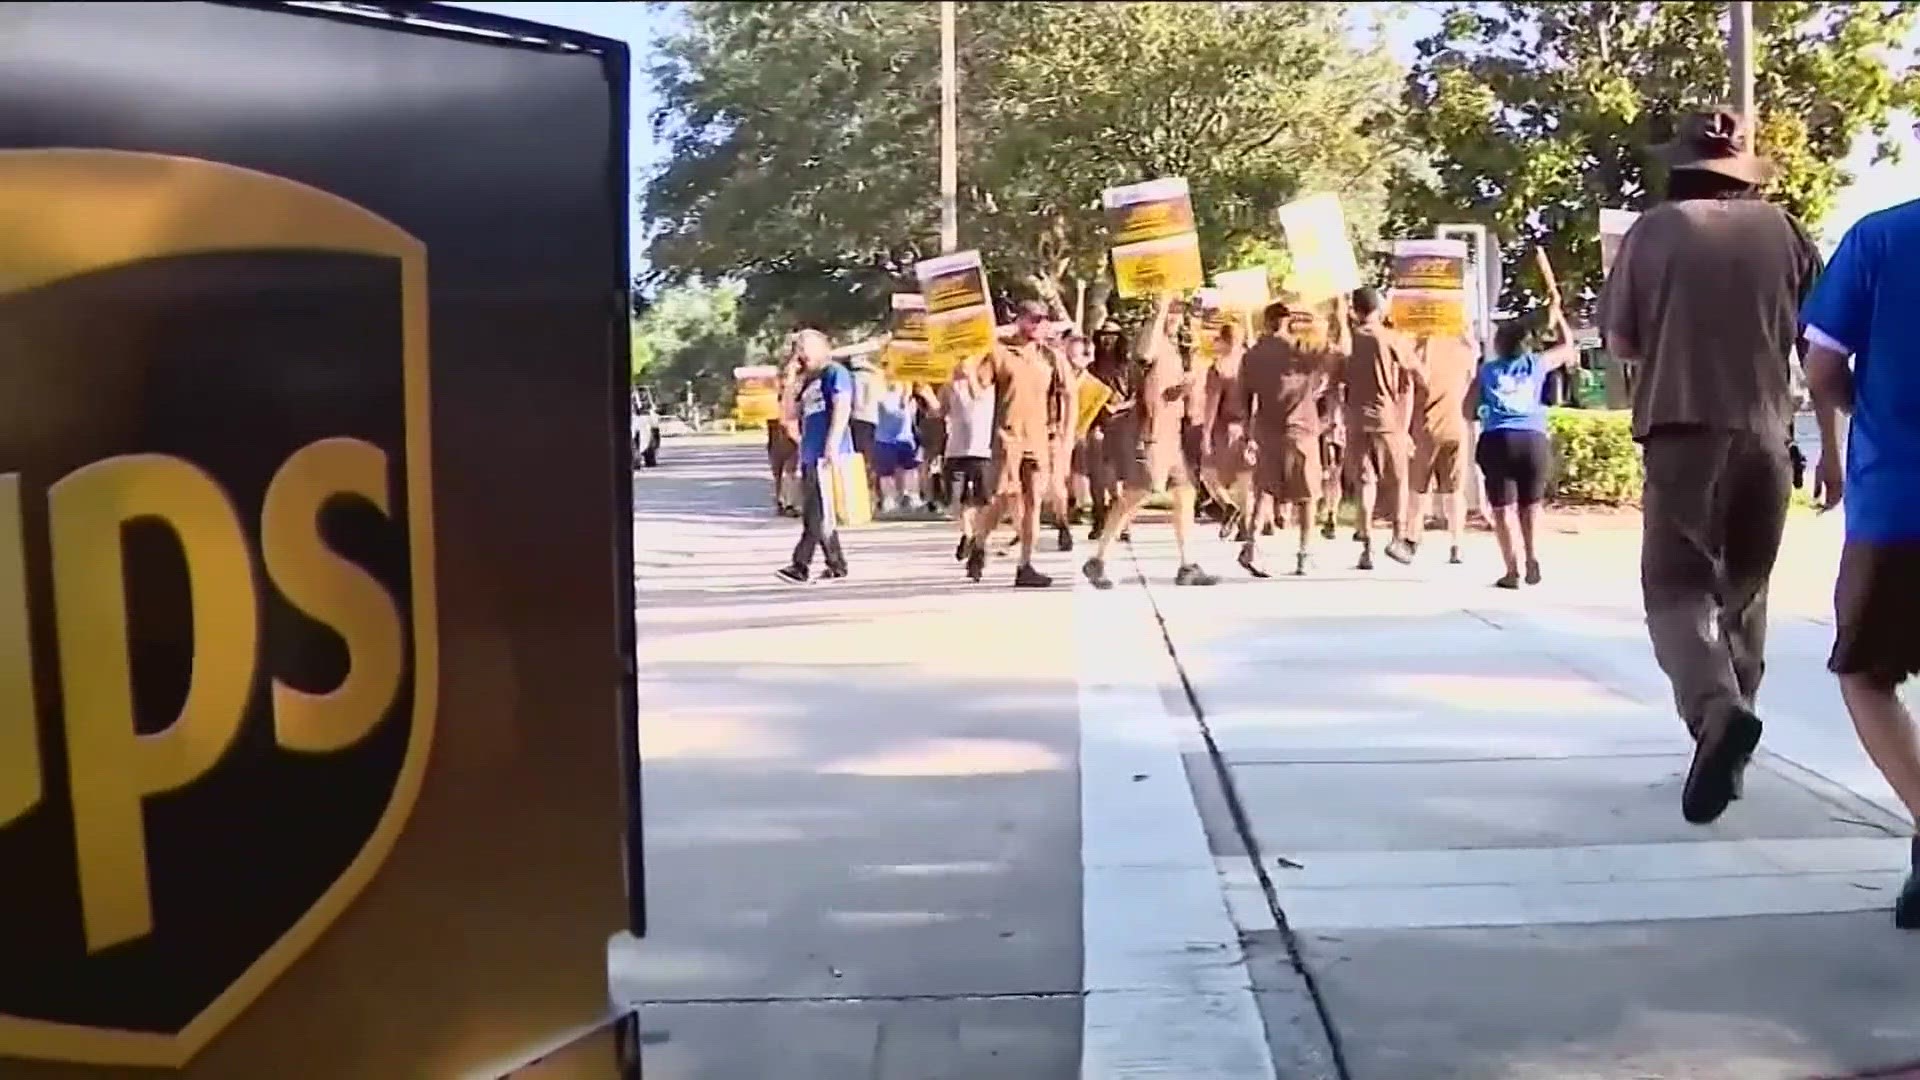 UPS reached a tentative contract with its 340,000-person union, potentially averting a strike.